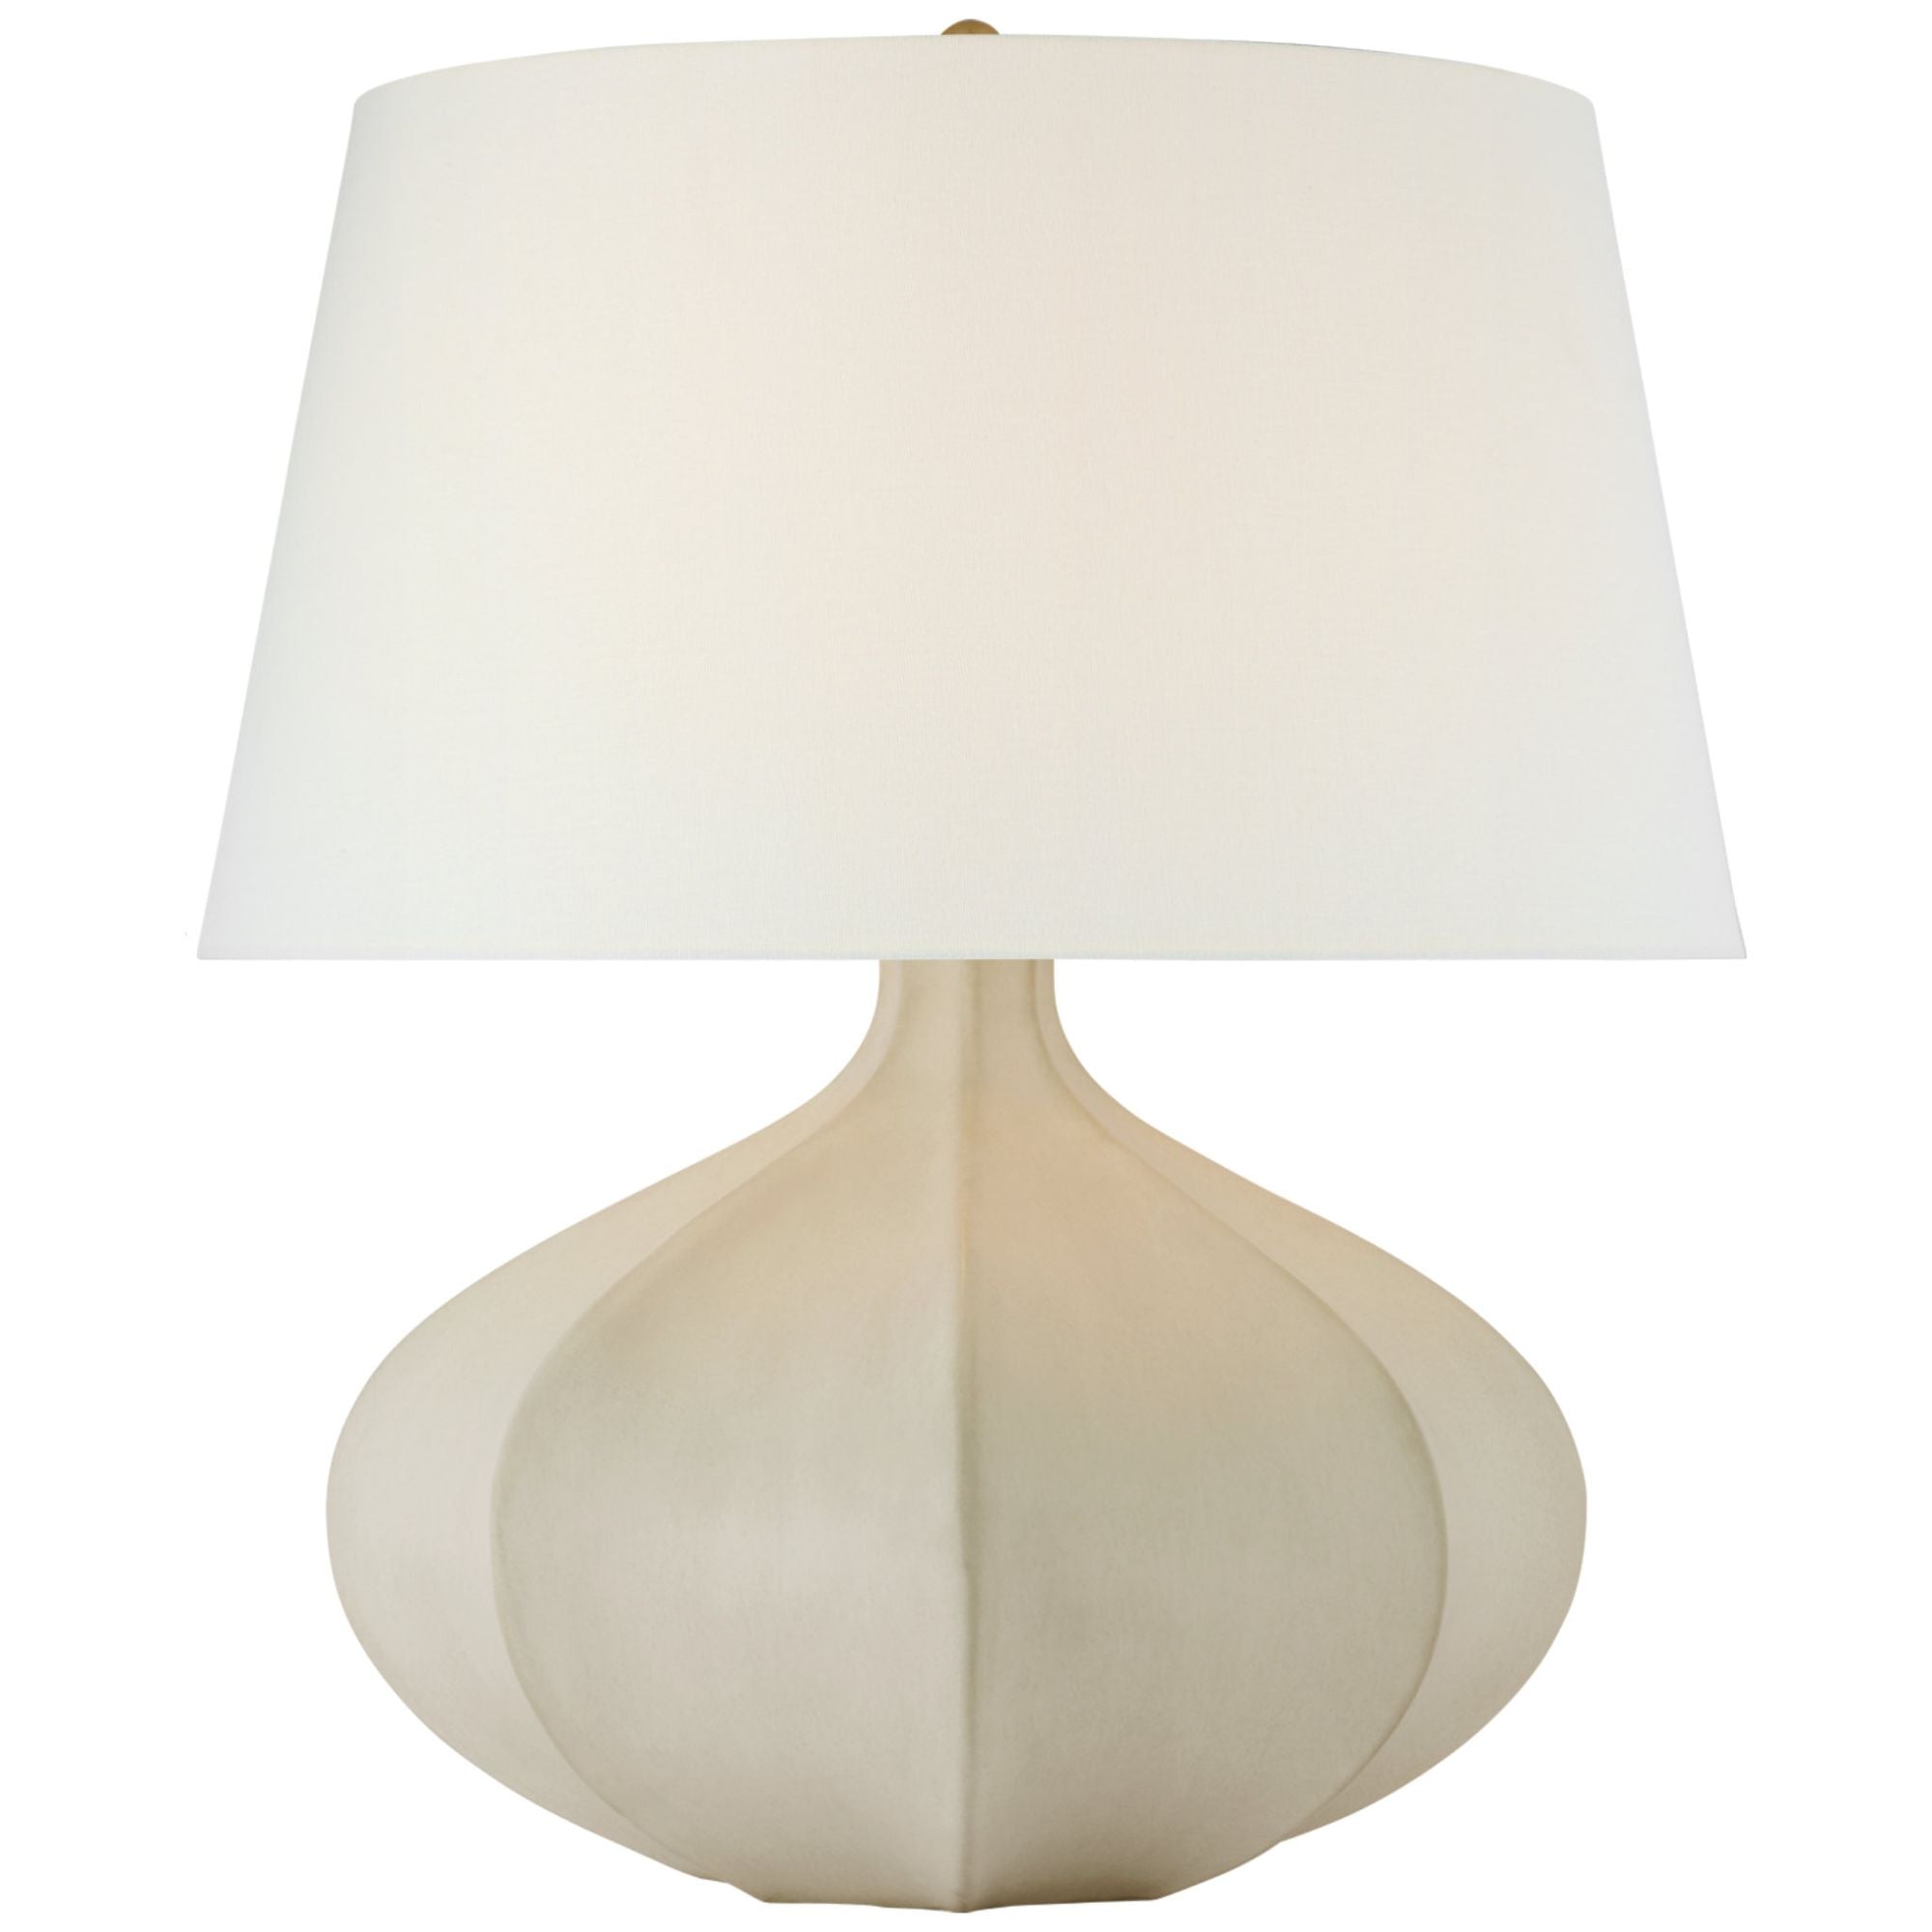 AERIN Rana Medium Wide Table Lamp in Stone White with Linen Shade